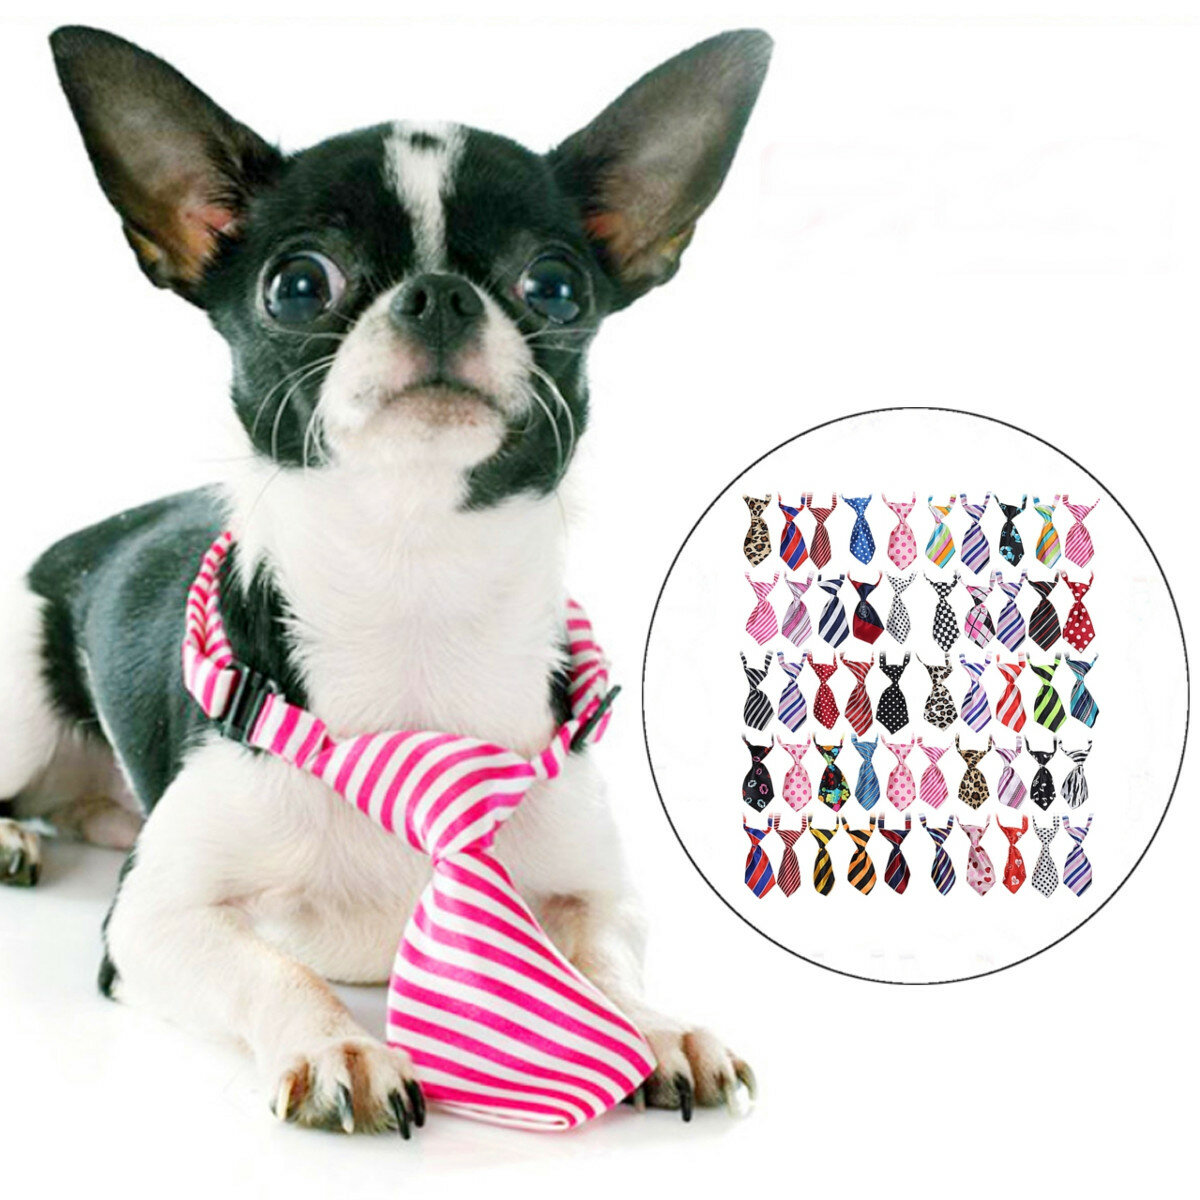 50 pcs Pet Tie Dog Scarf Cat Necklace Adjustable Strap for Cat Grooming Dogs Collar Accessories Pet Supplies Formal Cost